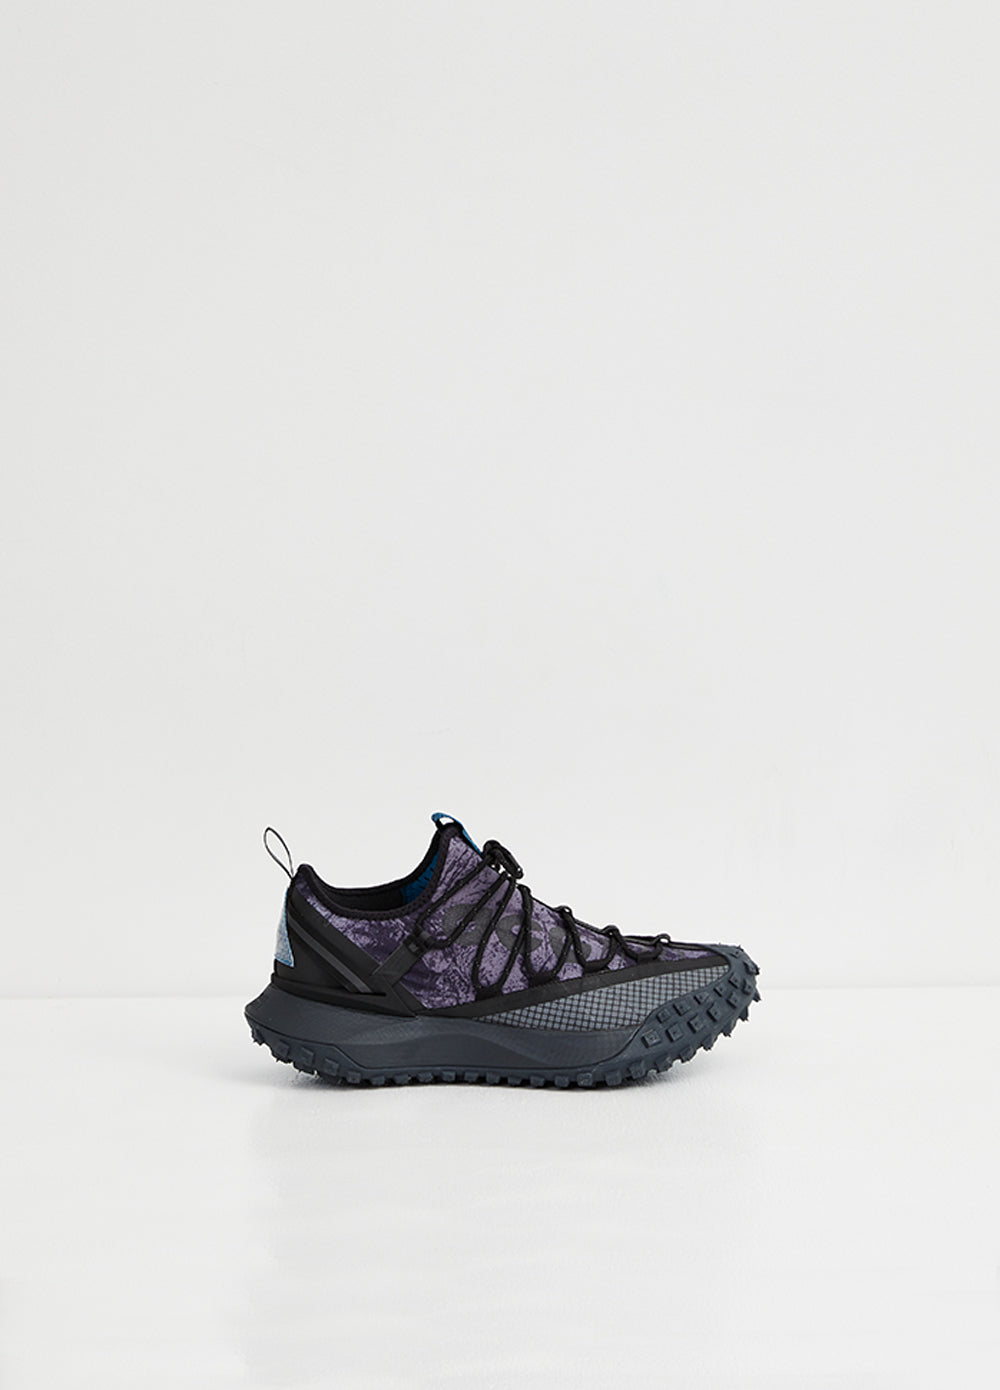 ACG Mountain Fly Sneakers